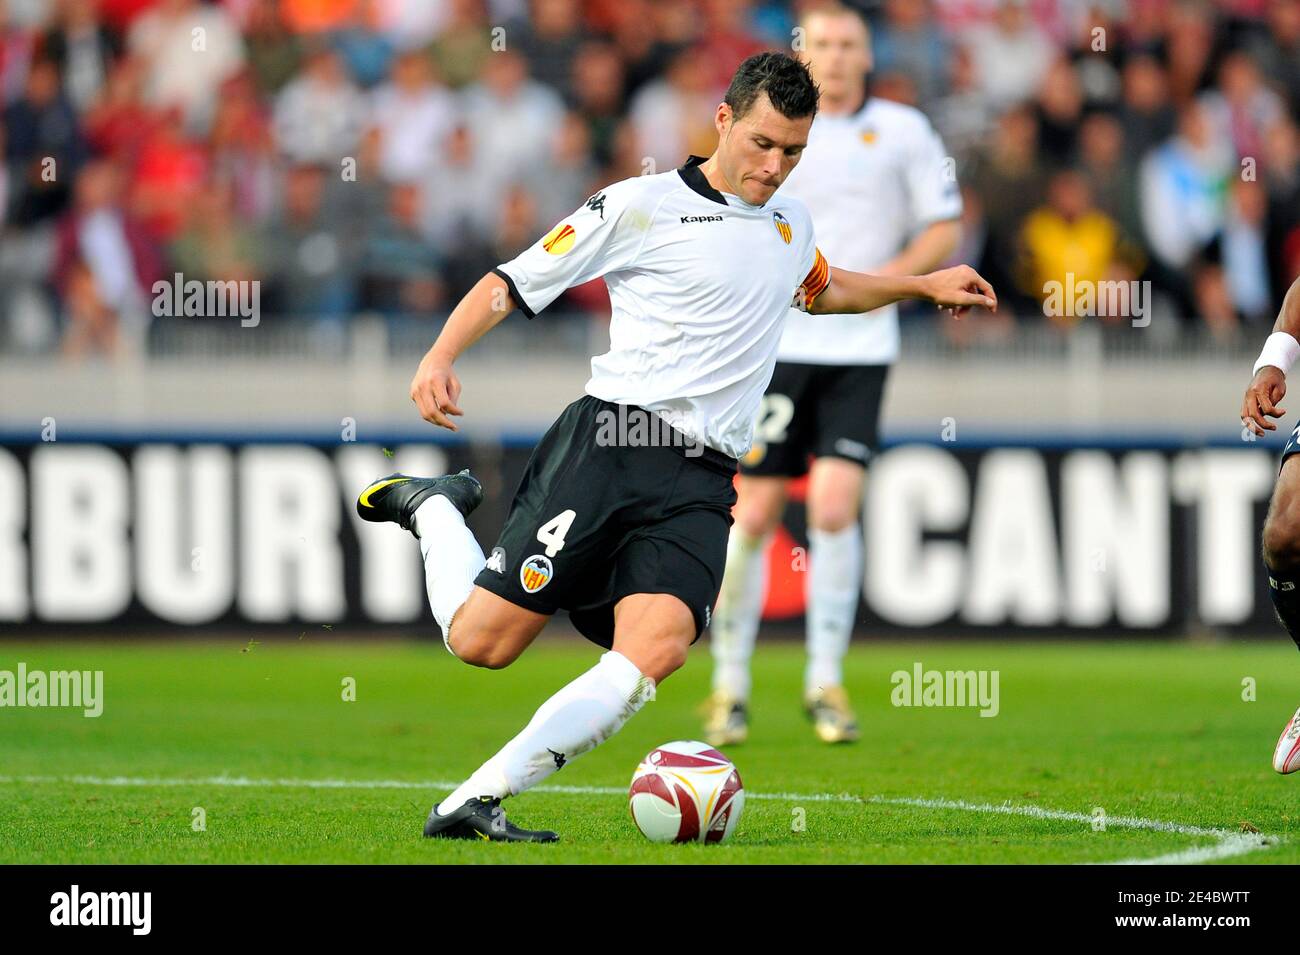 Valencia's David Navarro during the UEFA Europa League soccer match, LOSC  Lille Metropole vs Valencia CF at the Stadium Nord in Villeneuve d'Ascq,  France on September 18, 2009. (1-1). Photo by Stephane